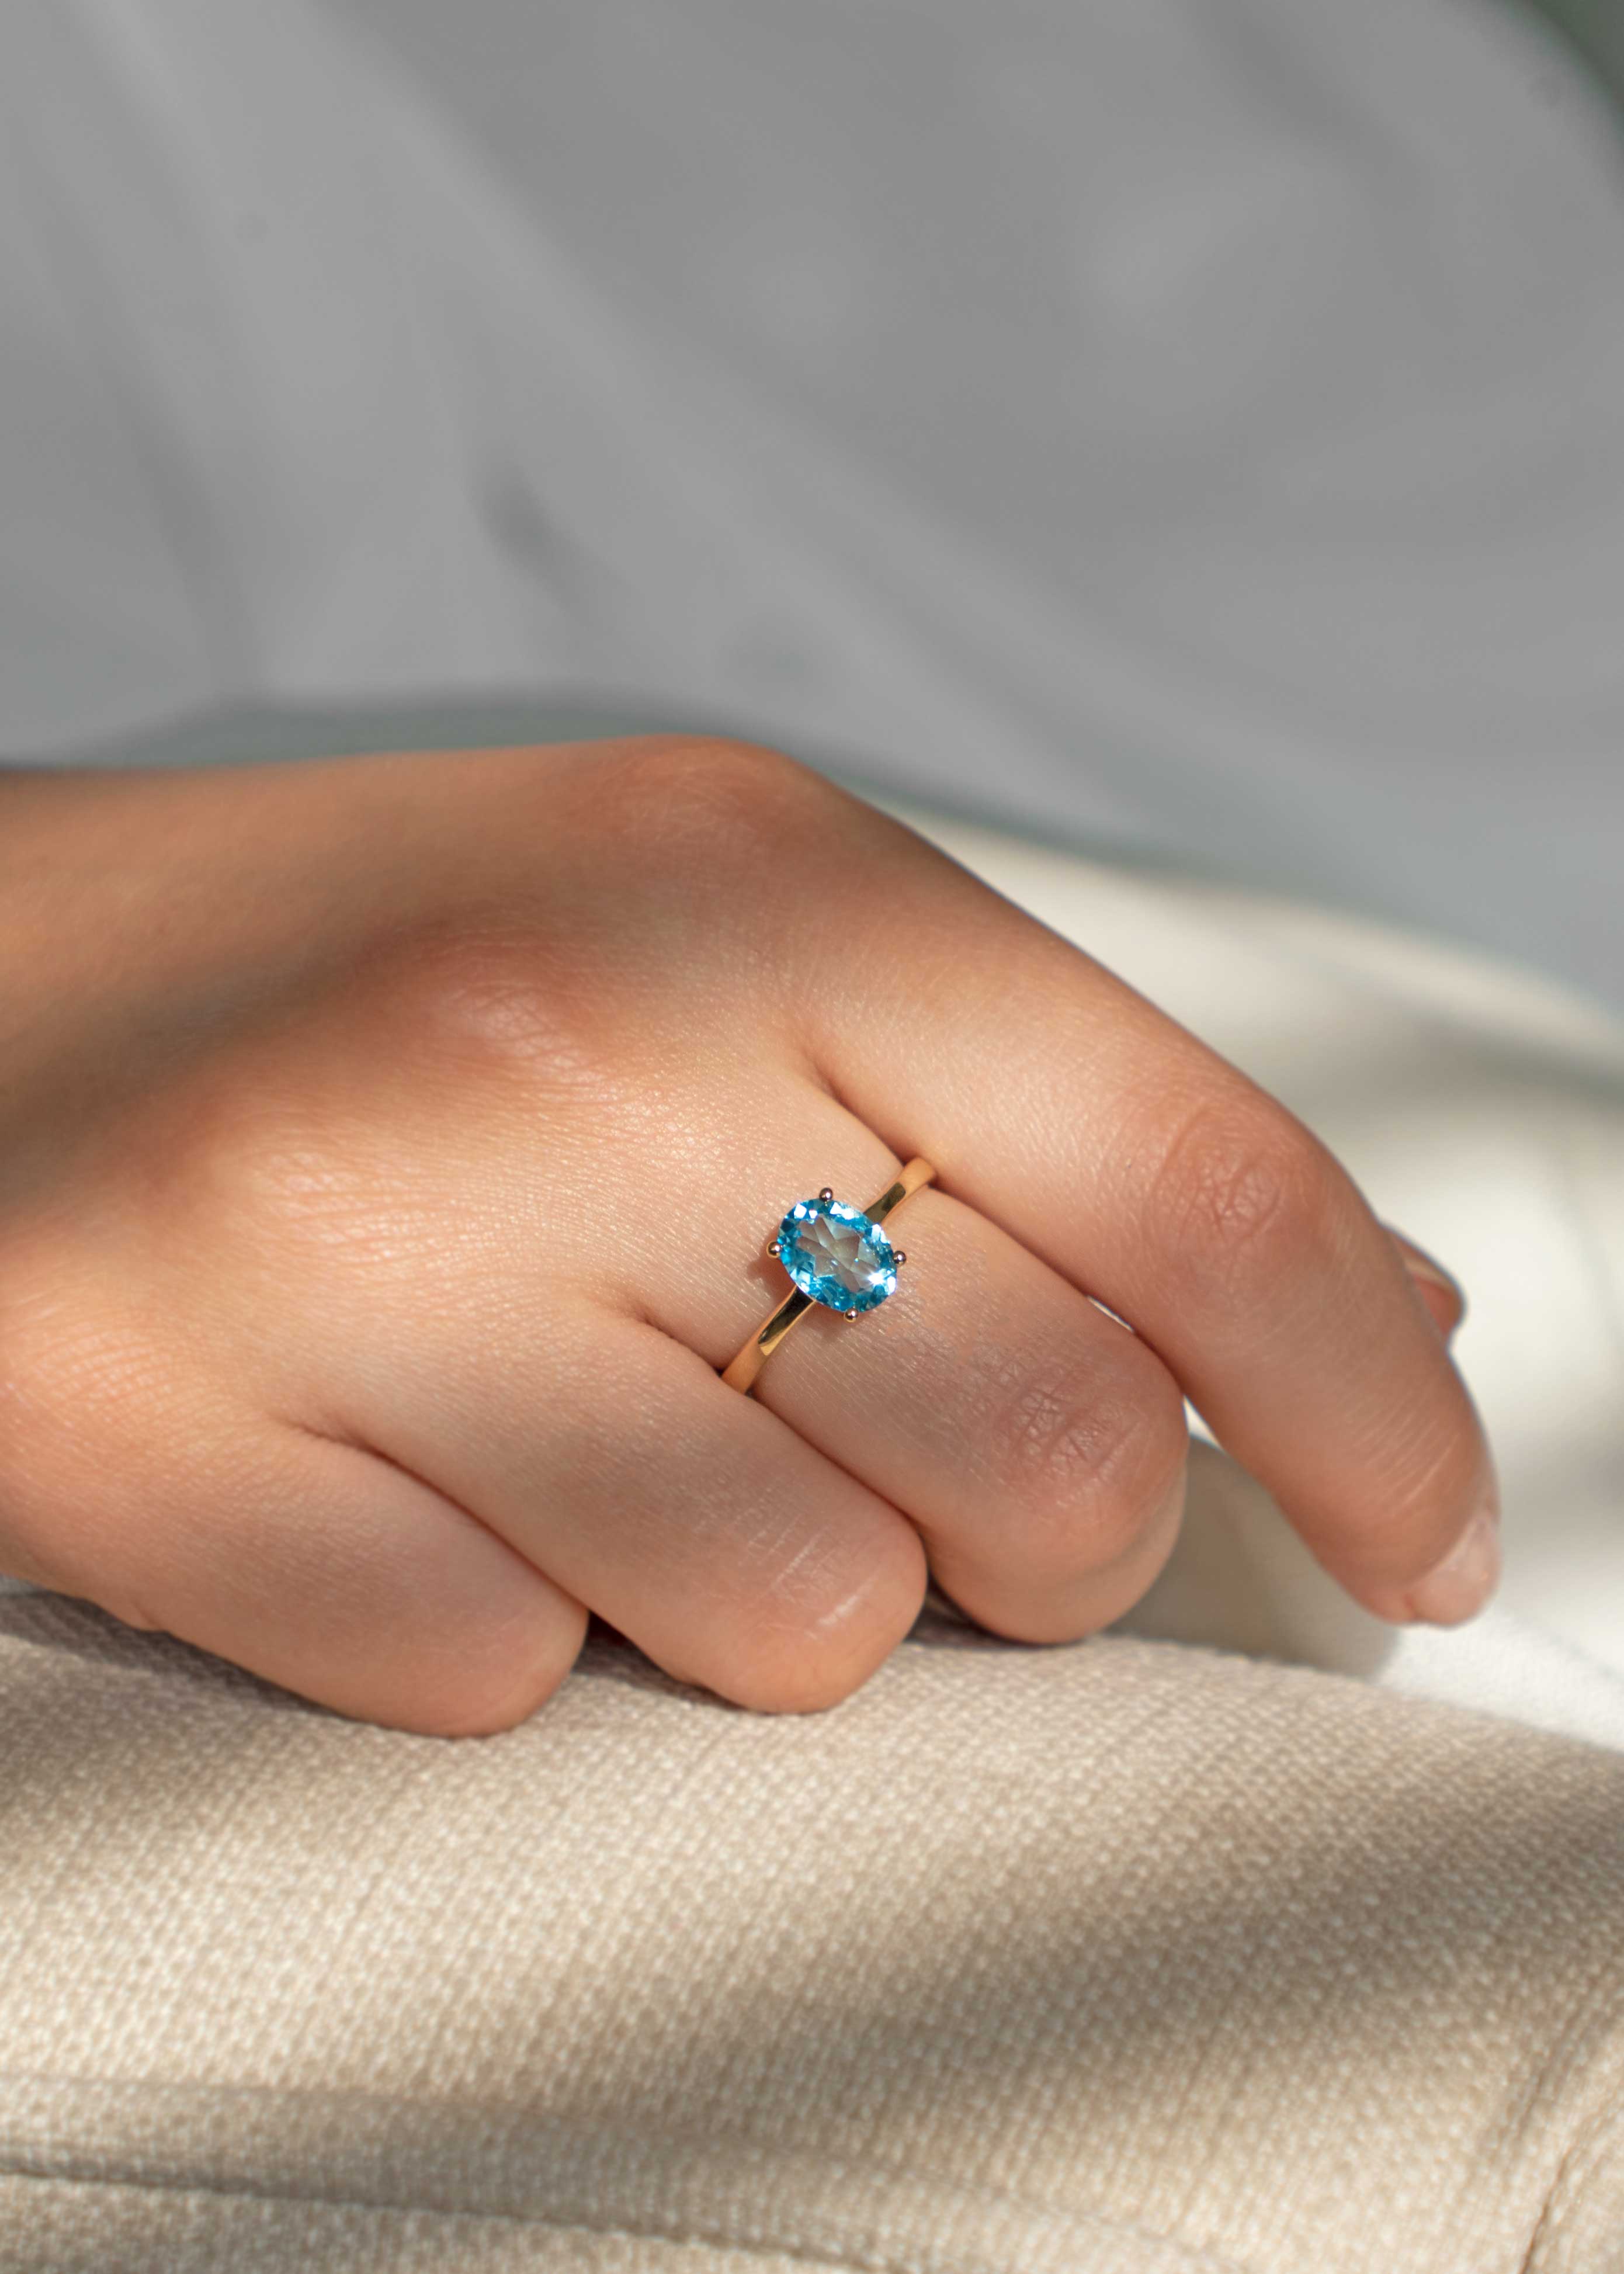 Blue Topaz Rings | Temple and Grace Singapore